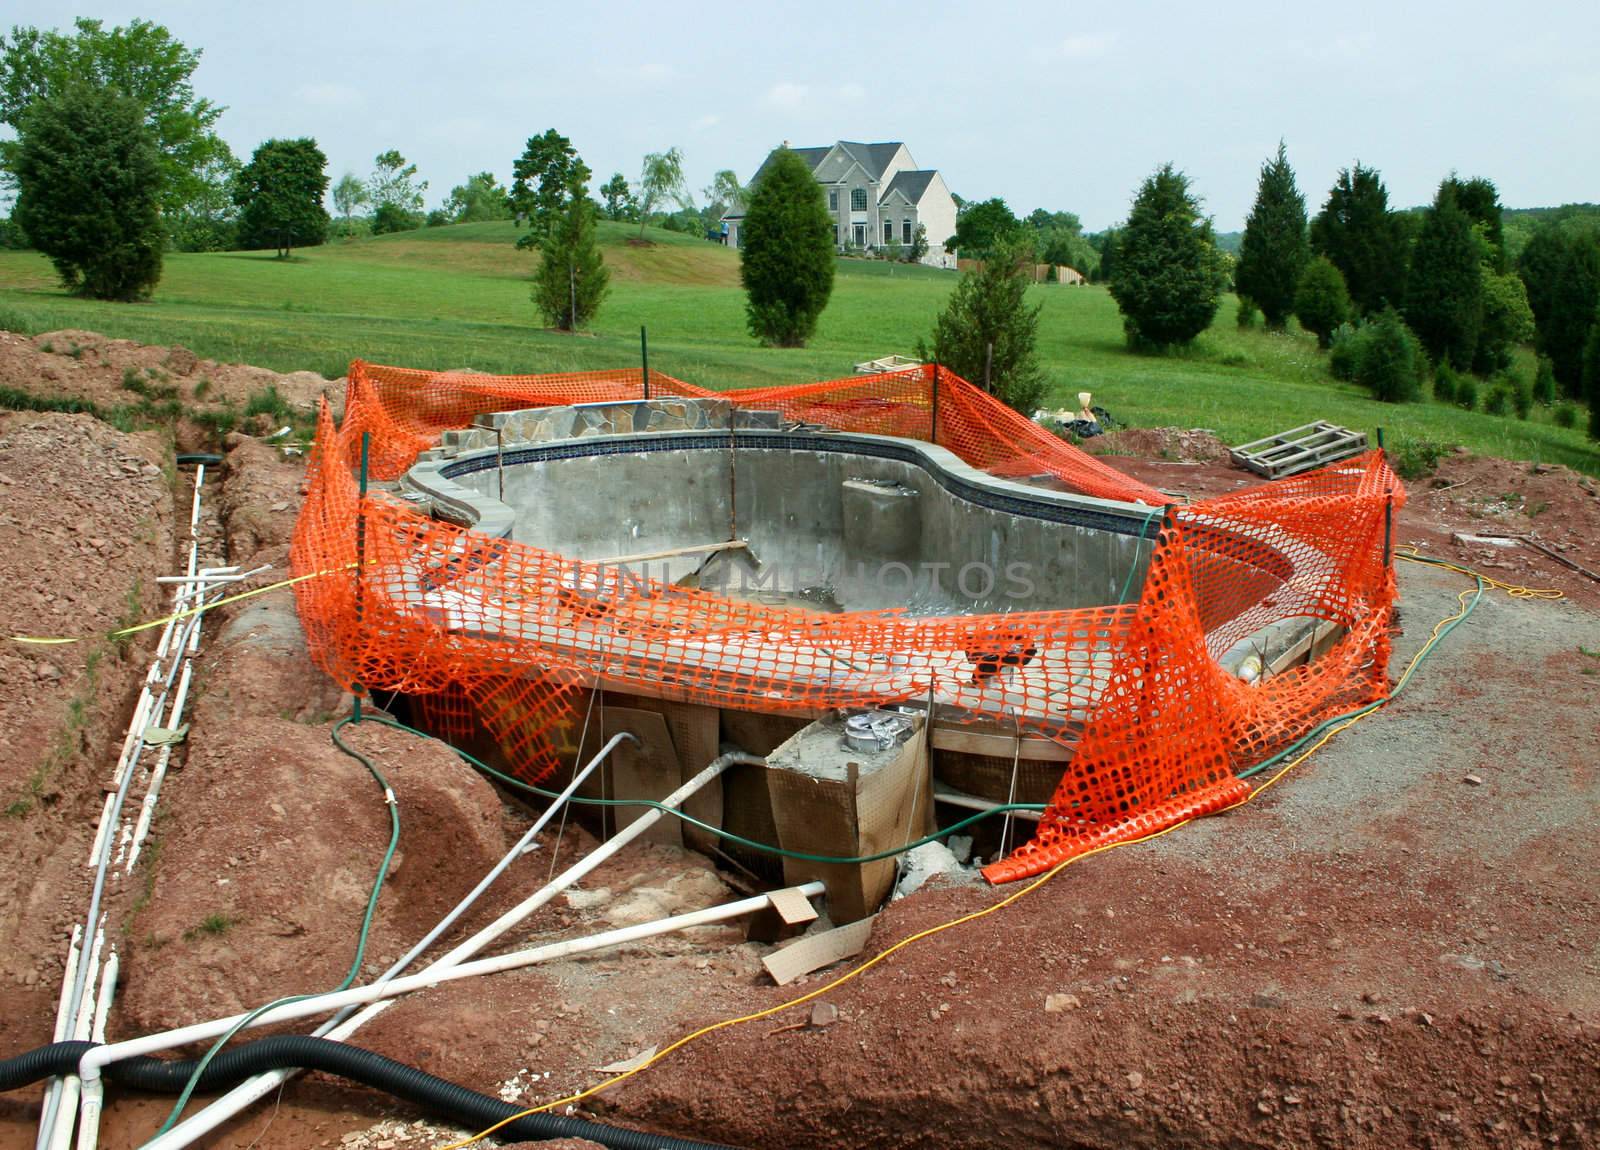 Creating a concrete swimming pool in residential back yard